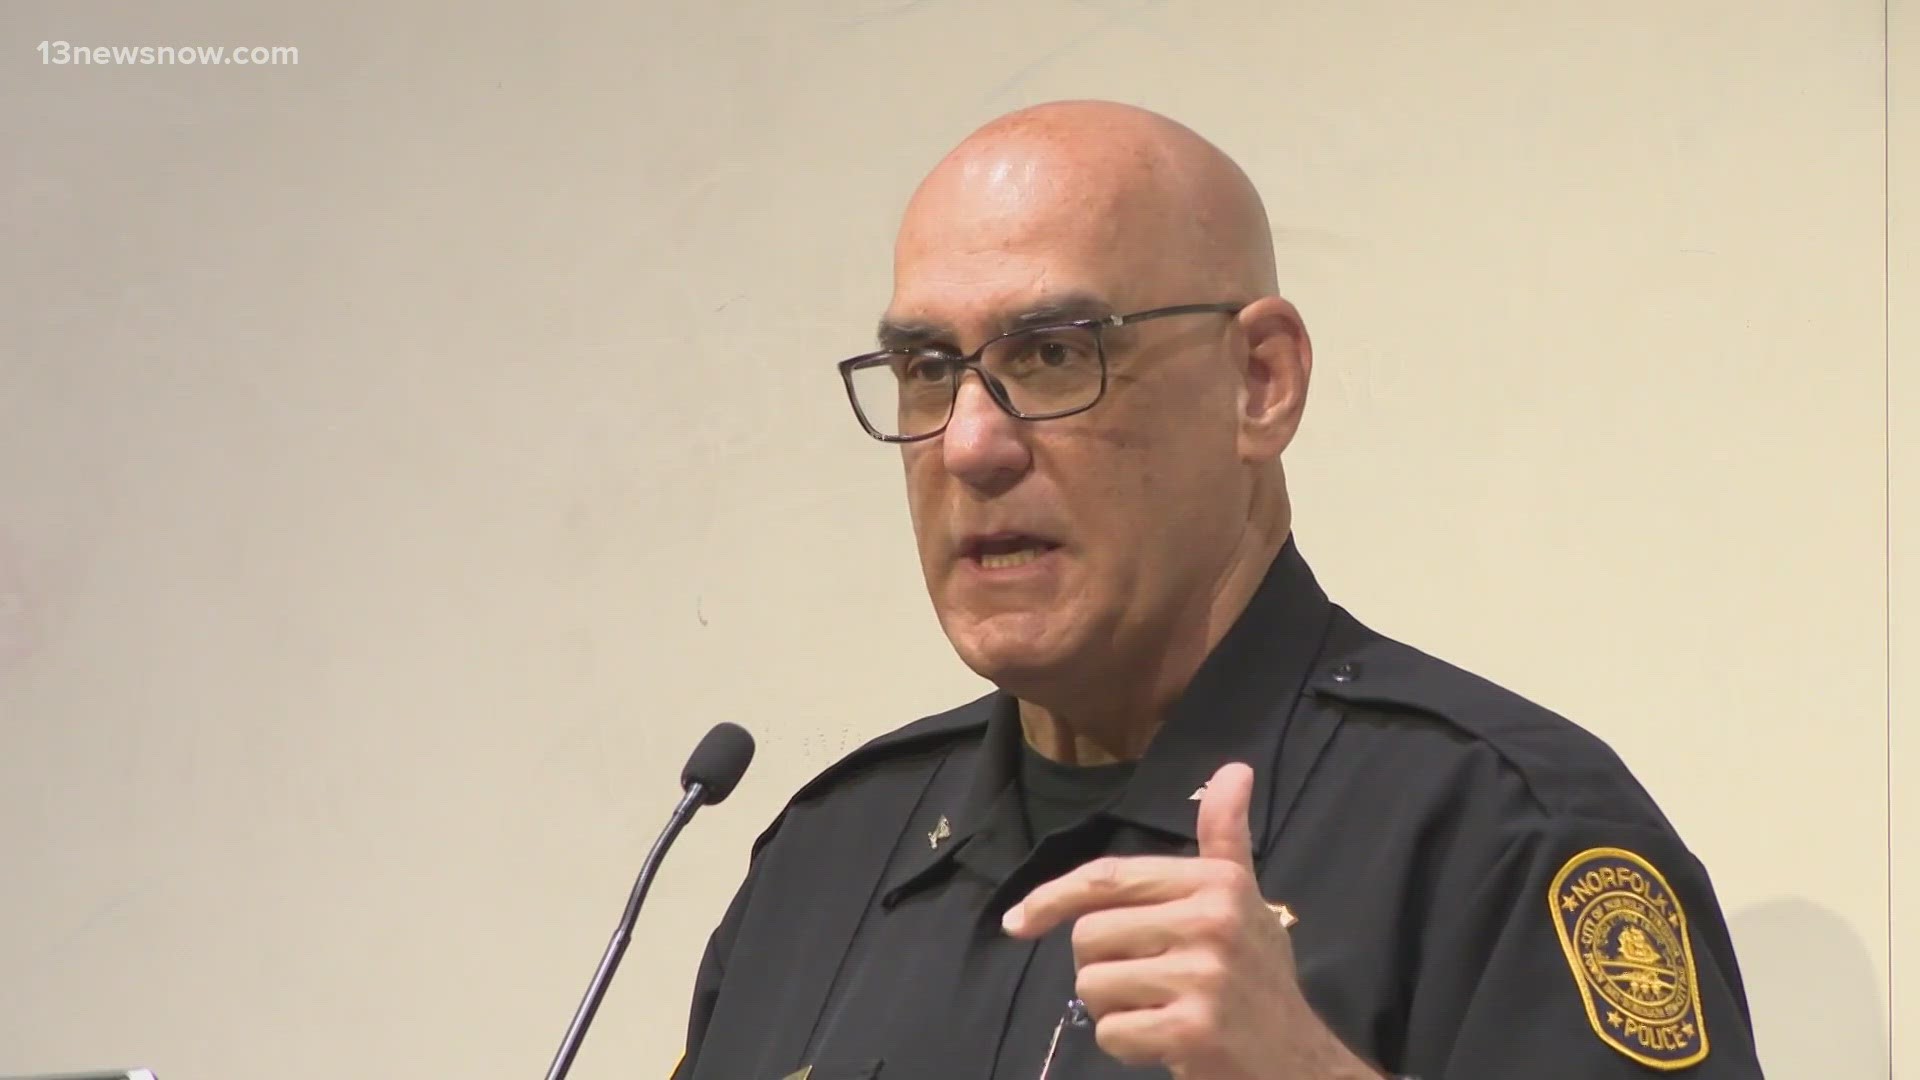 Norfolk's interim police chief is on his way out! The city just announced Michael Goldsmith will retire in two weeks.